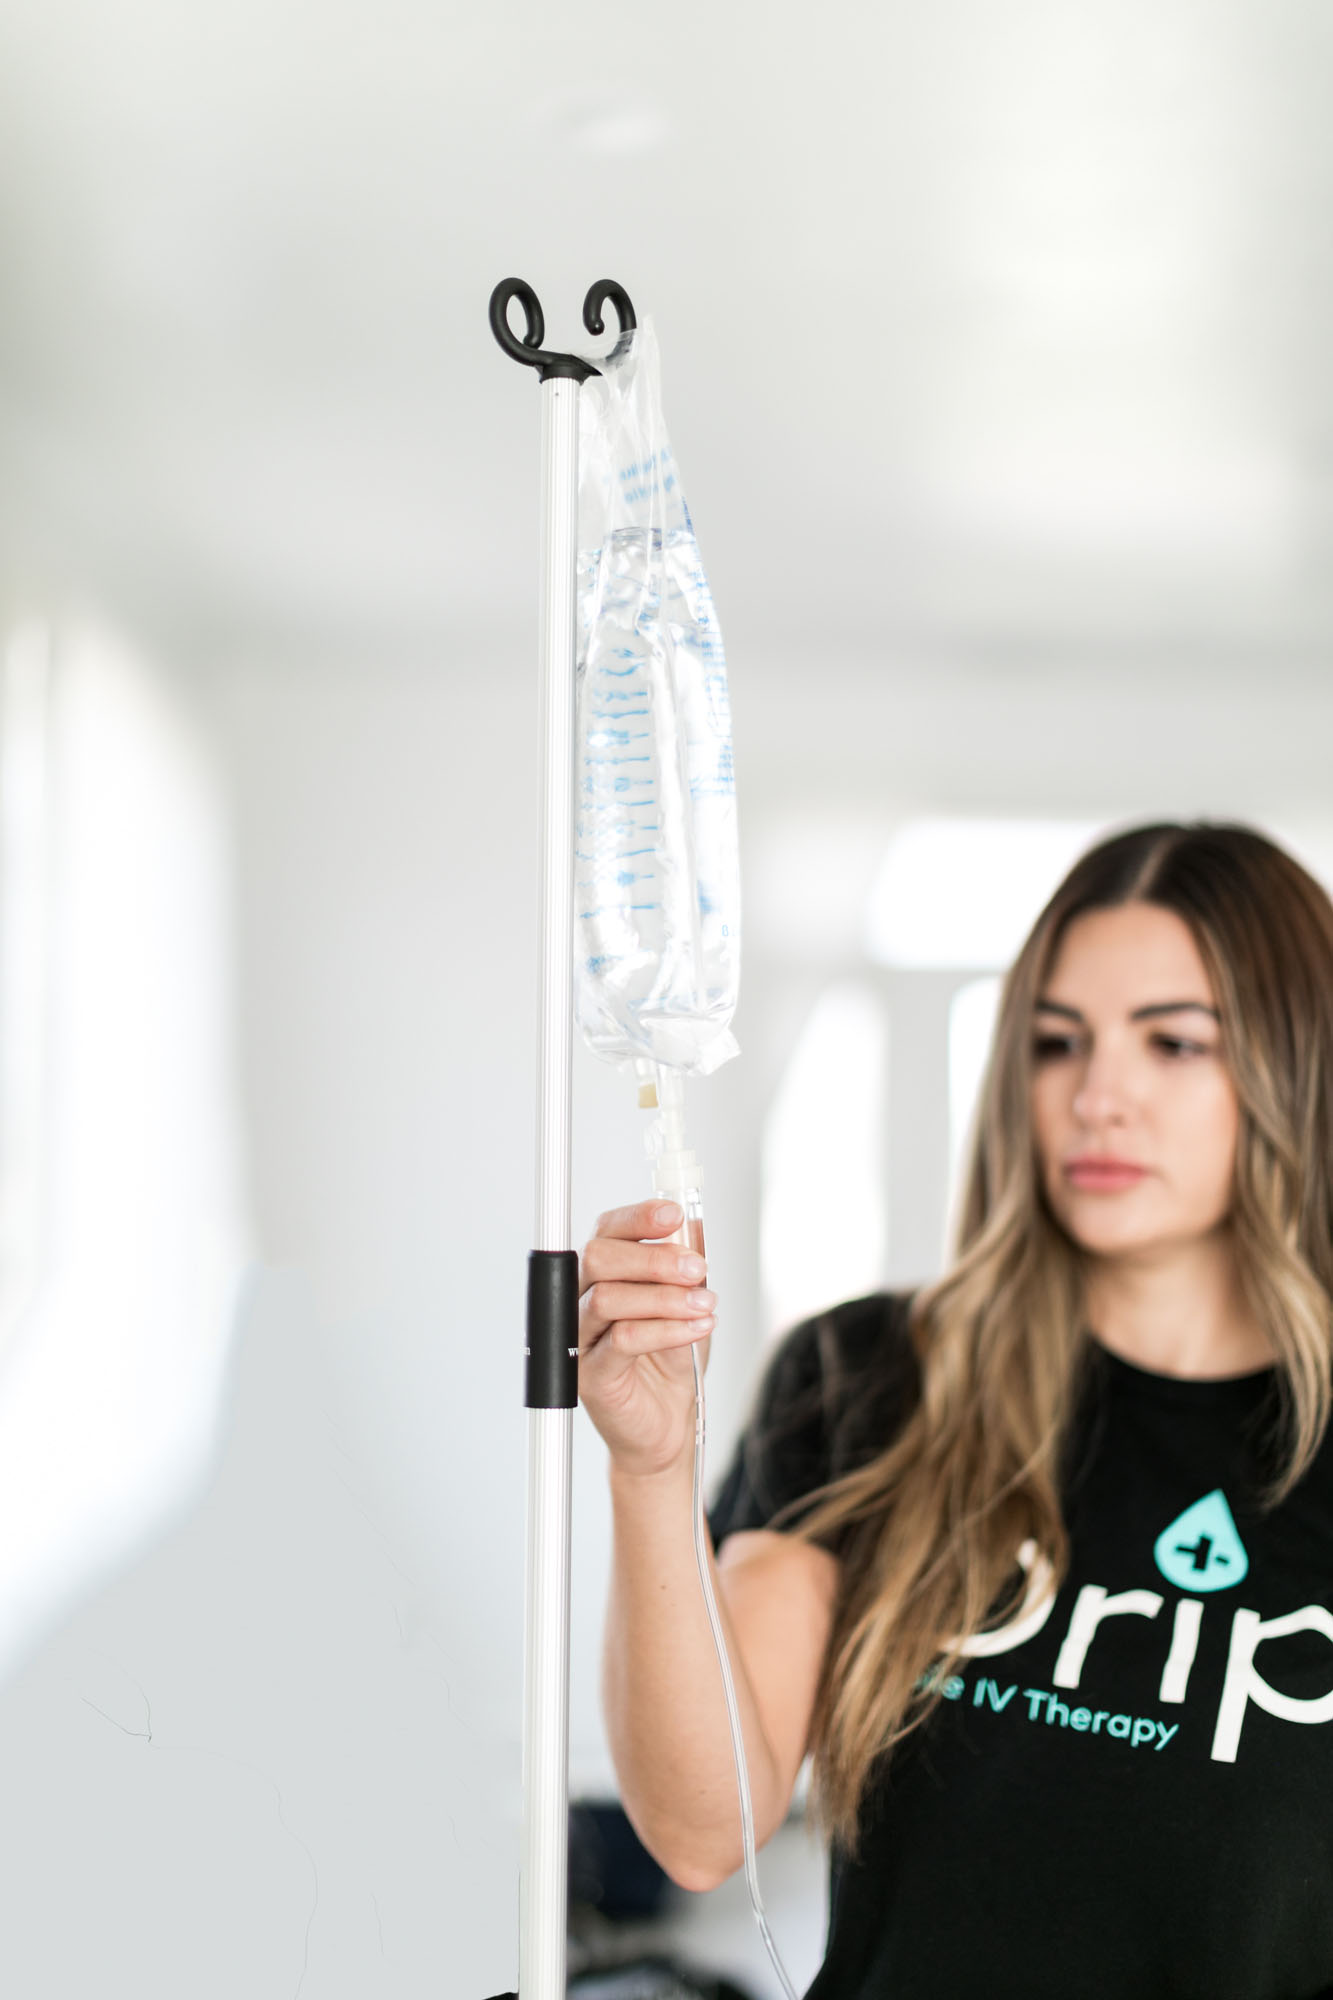 Nurse working with a bag for IV therapy for dehydration